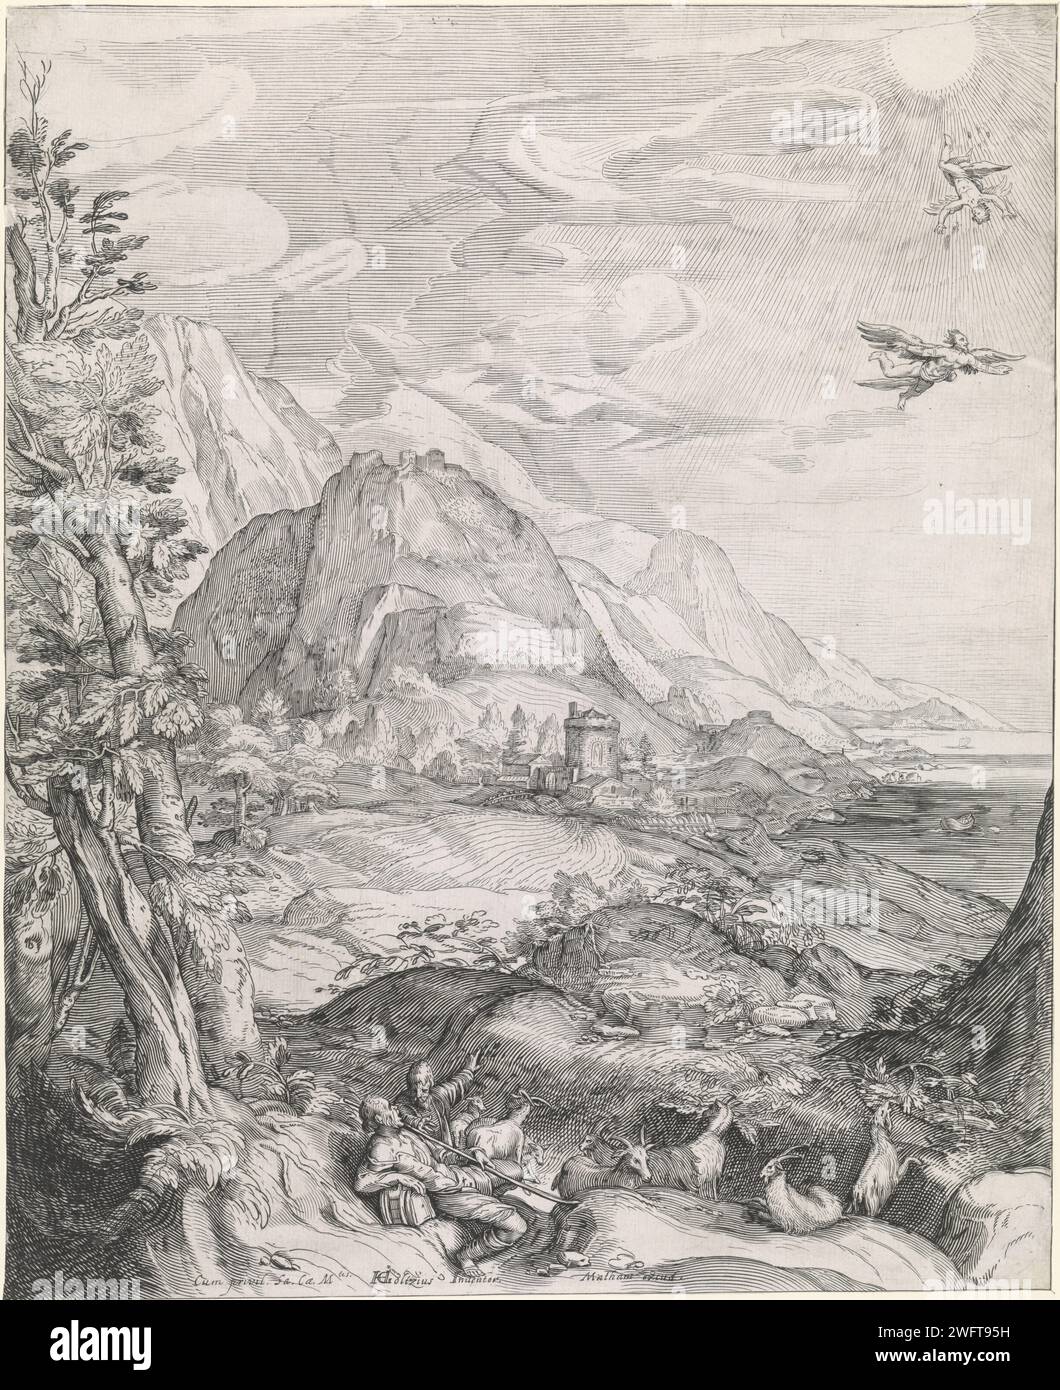 Landscape with the fall of Icarus, Jacob Matham (workshop of), After Hendrick Goltzius, 1603 print In a wide hilly landscape, shepherds watch with their herd of how Icarus flies too close to the sun. His wings melt his wings through the heat. His father Daedalus flies under him. Haarlem paper engraving death i.e. the fall of Icarus (Daedalus present) Stock Photo